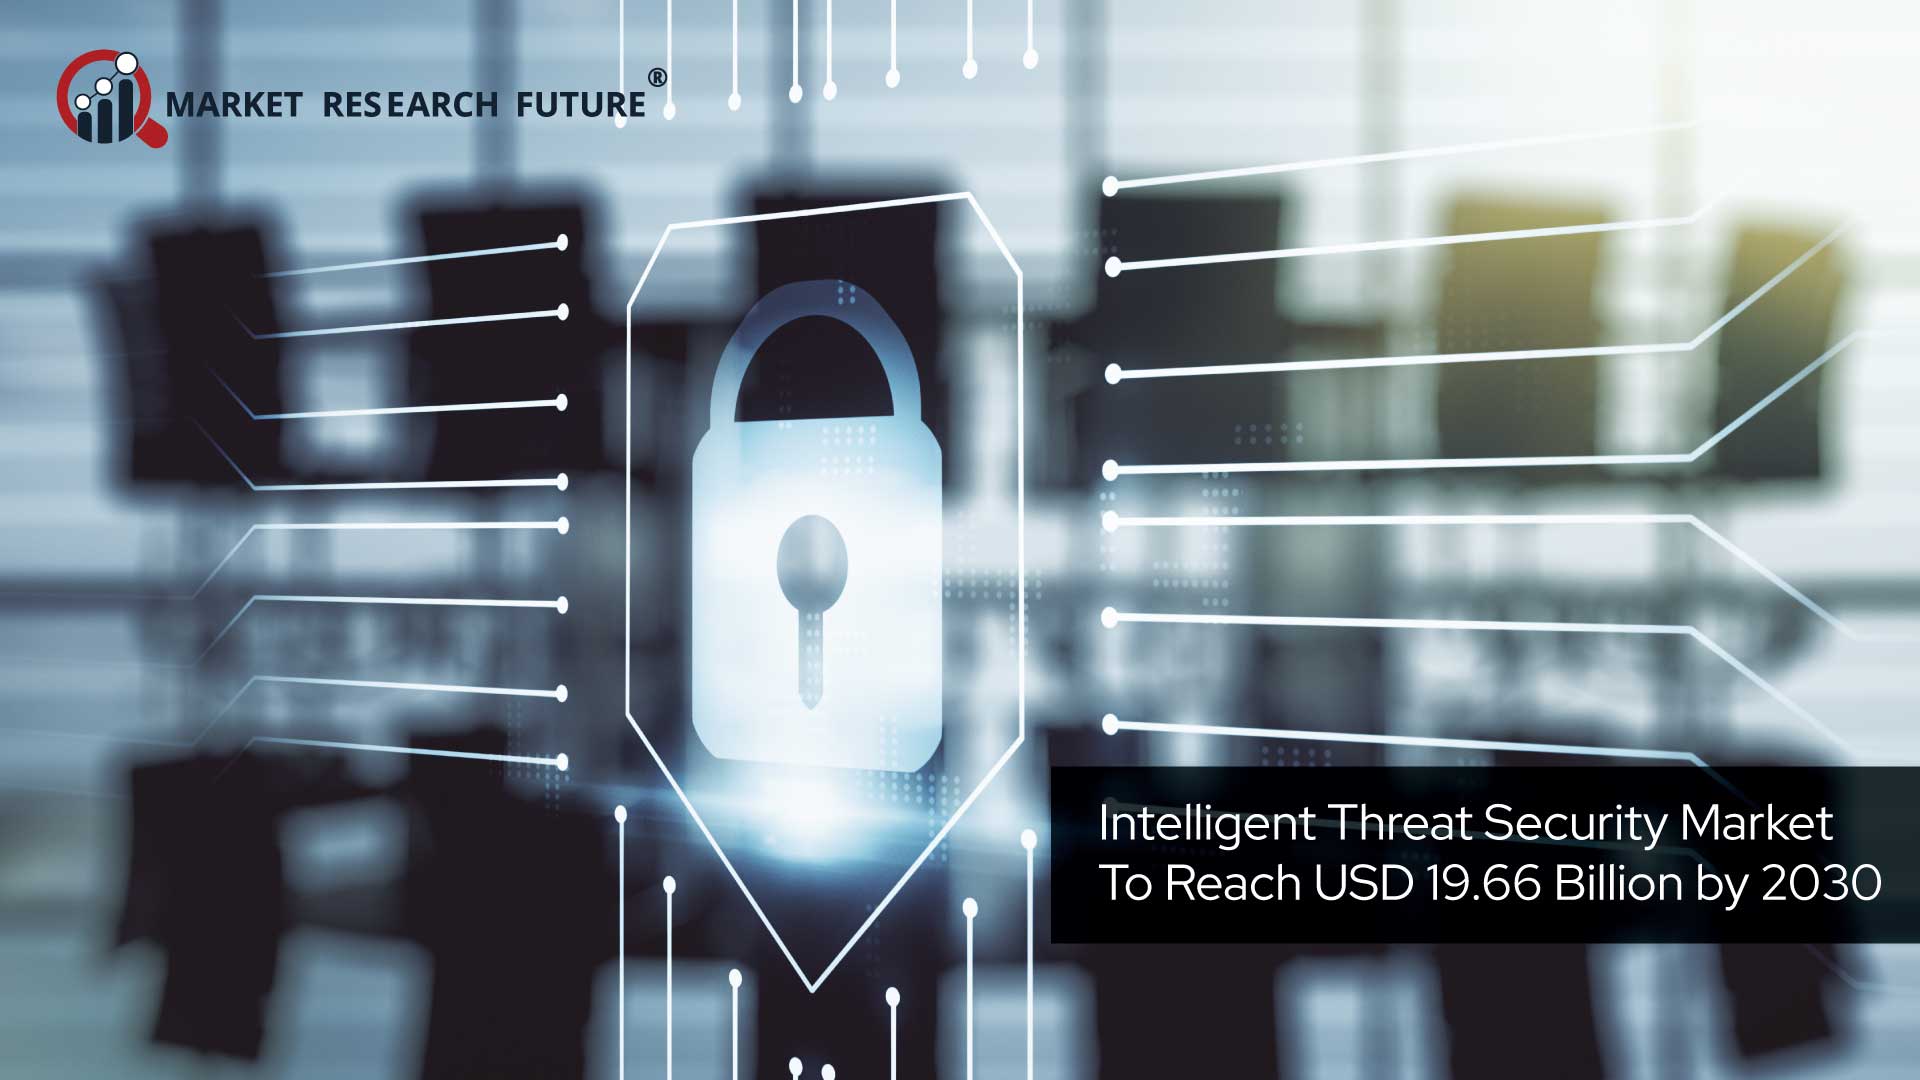 Intelligent Threat Security Market To Reach USD 19.66 Billion at a 7.20% % CAGR by 2030 - Report by Market Research Future (MRFR)